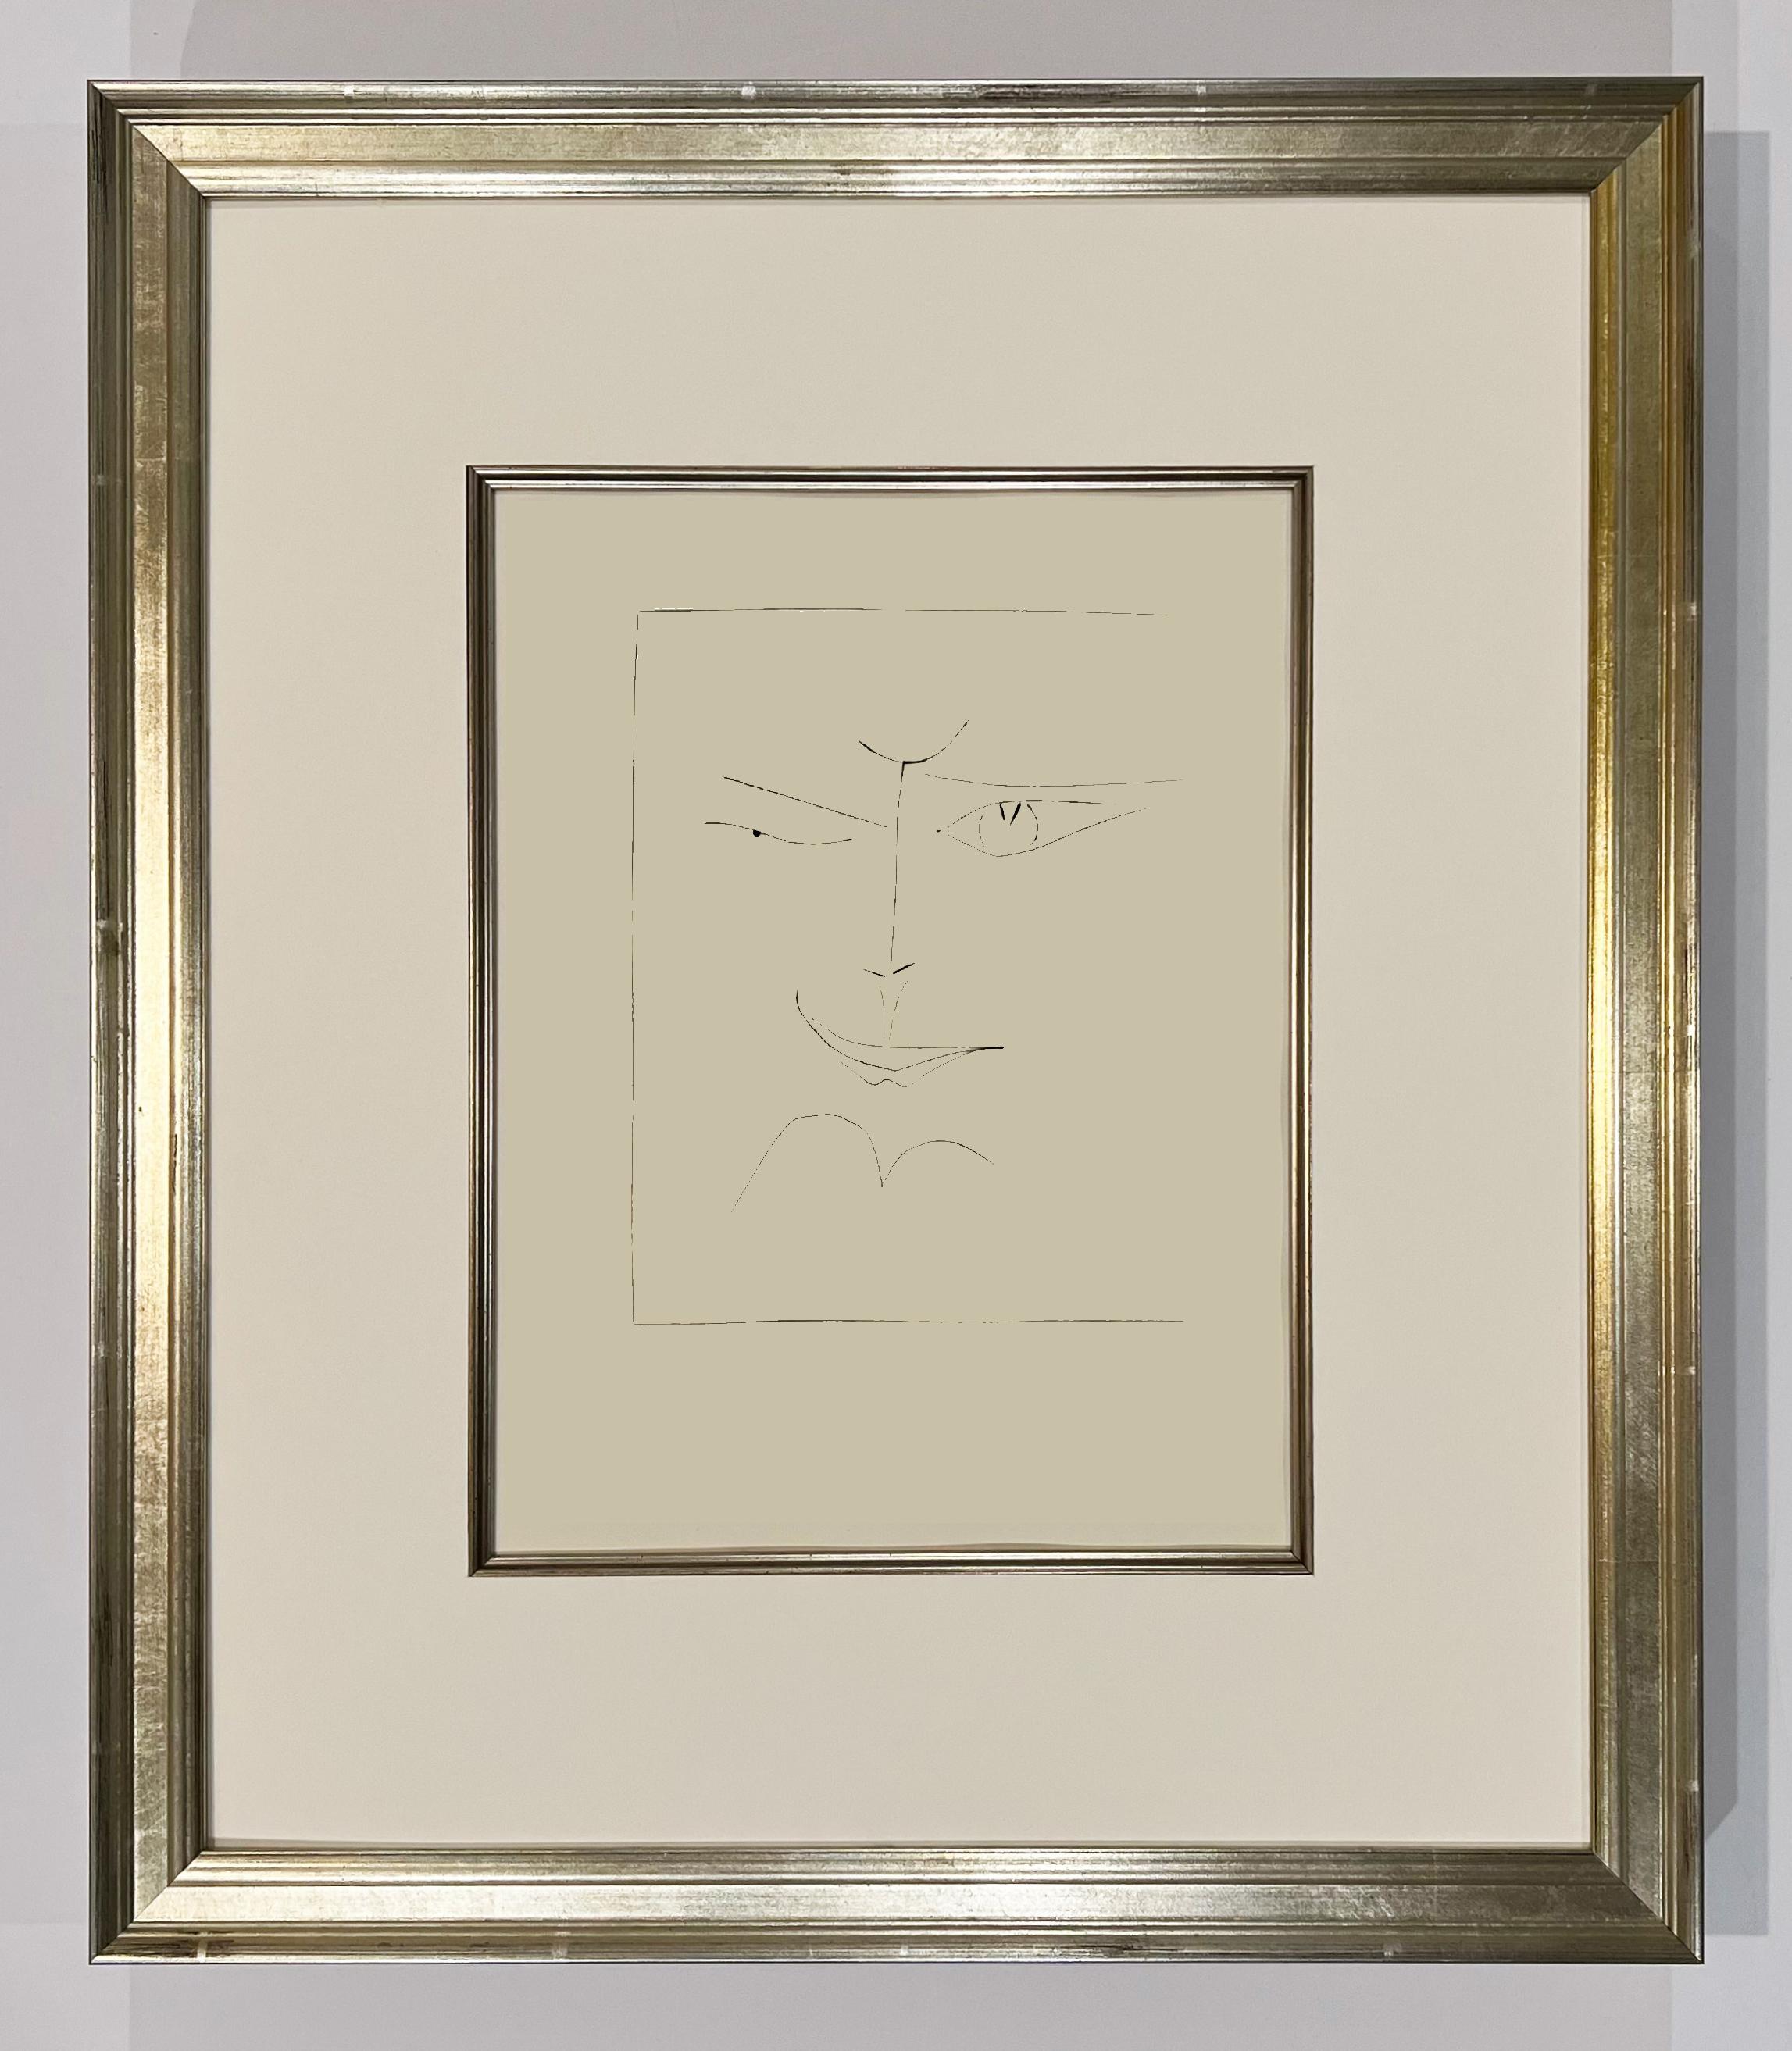 Square Face Smirking (Plate XXX), from Carmen - Print by Pablo Picasso